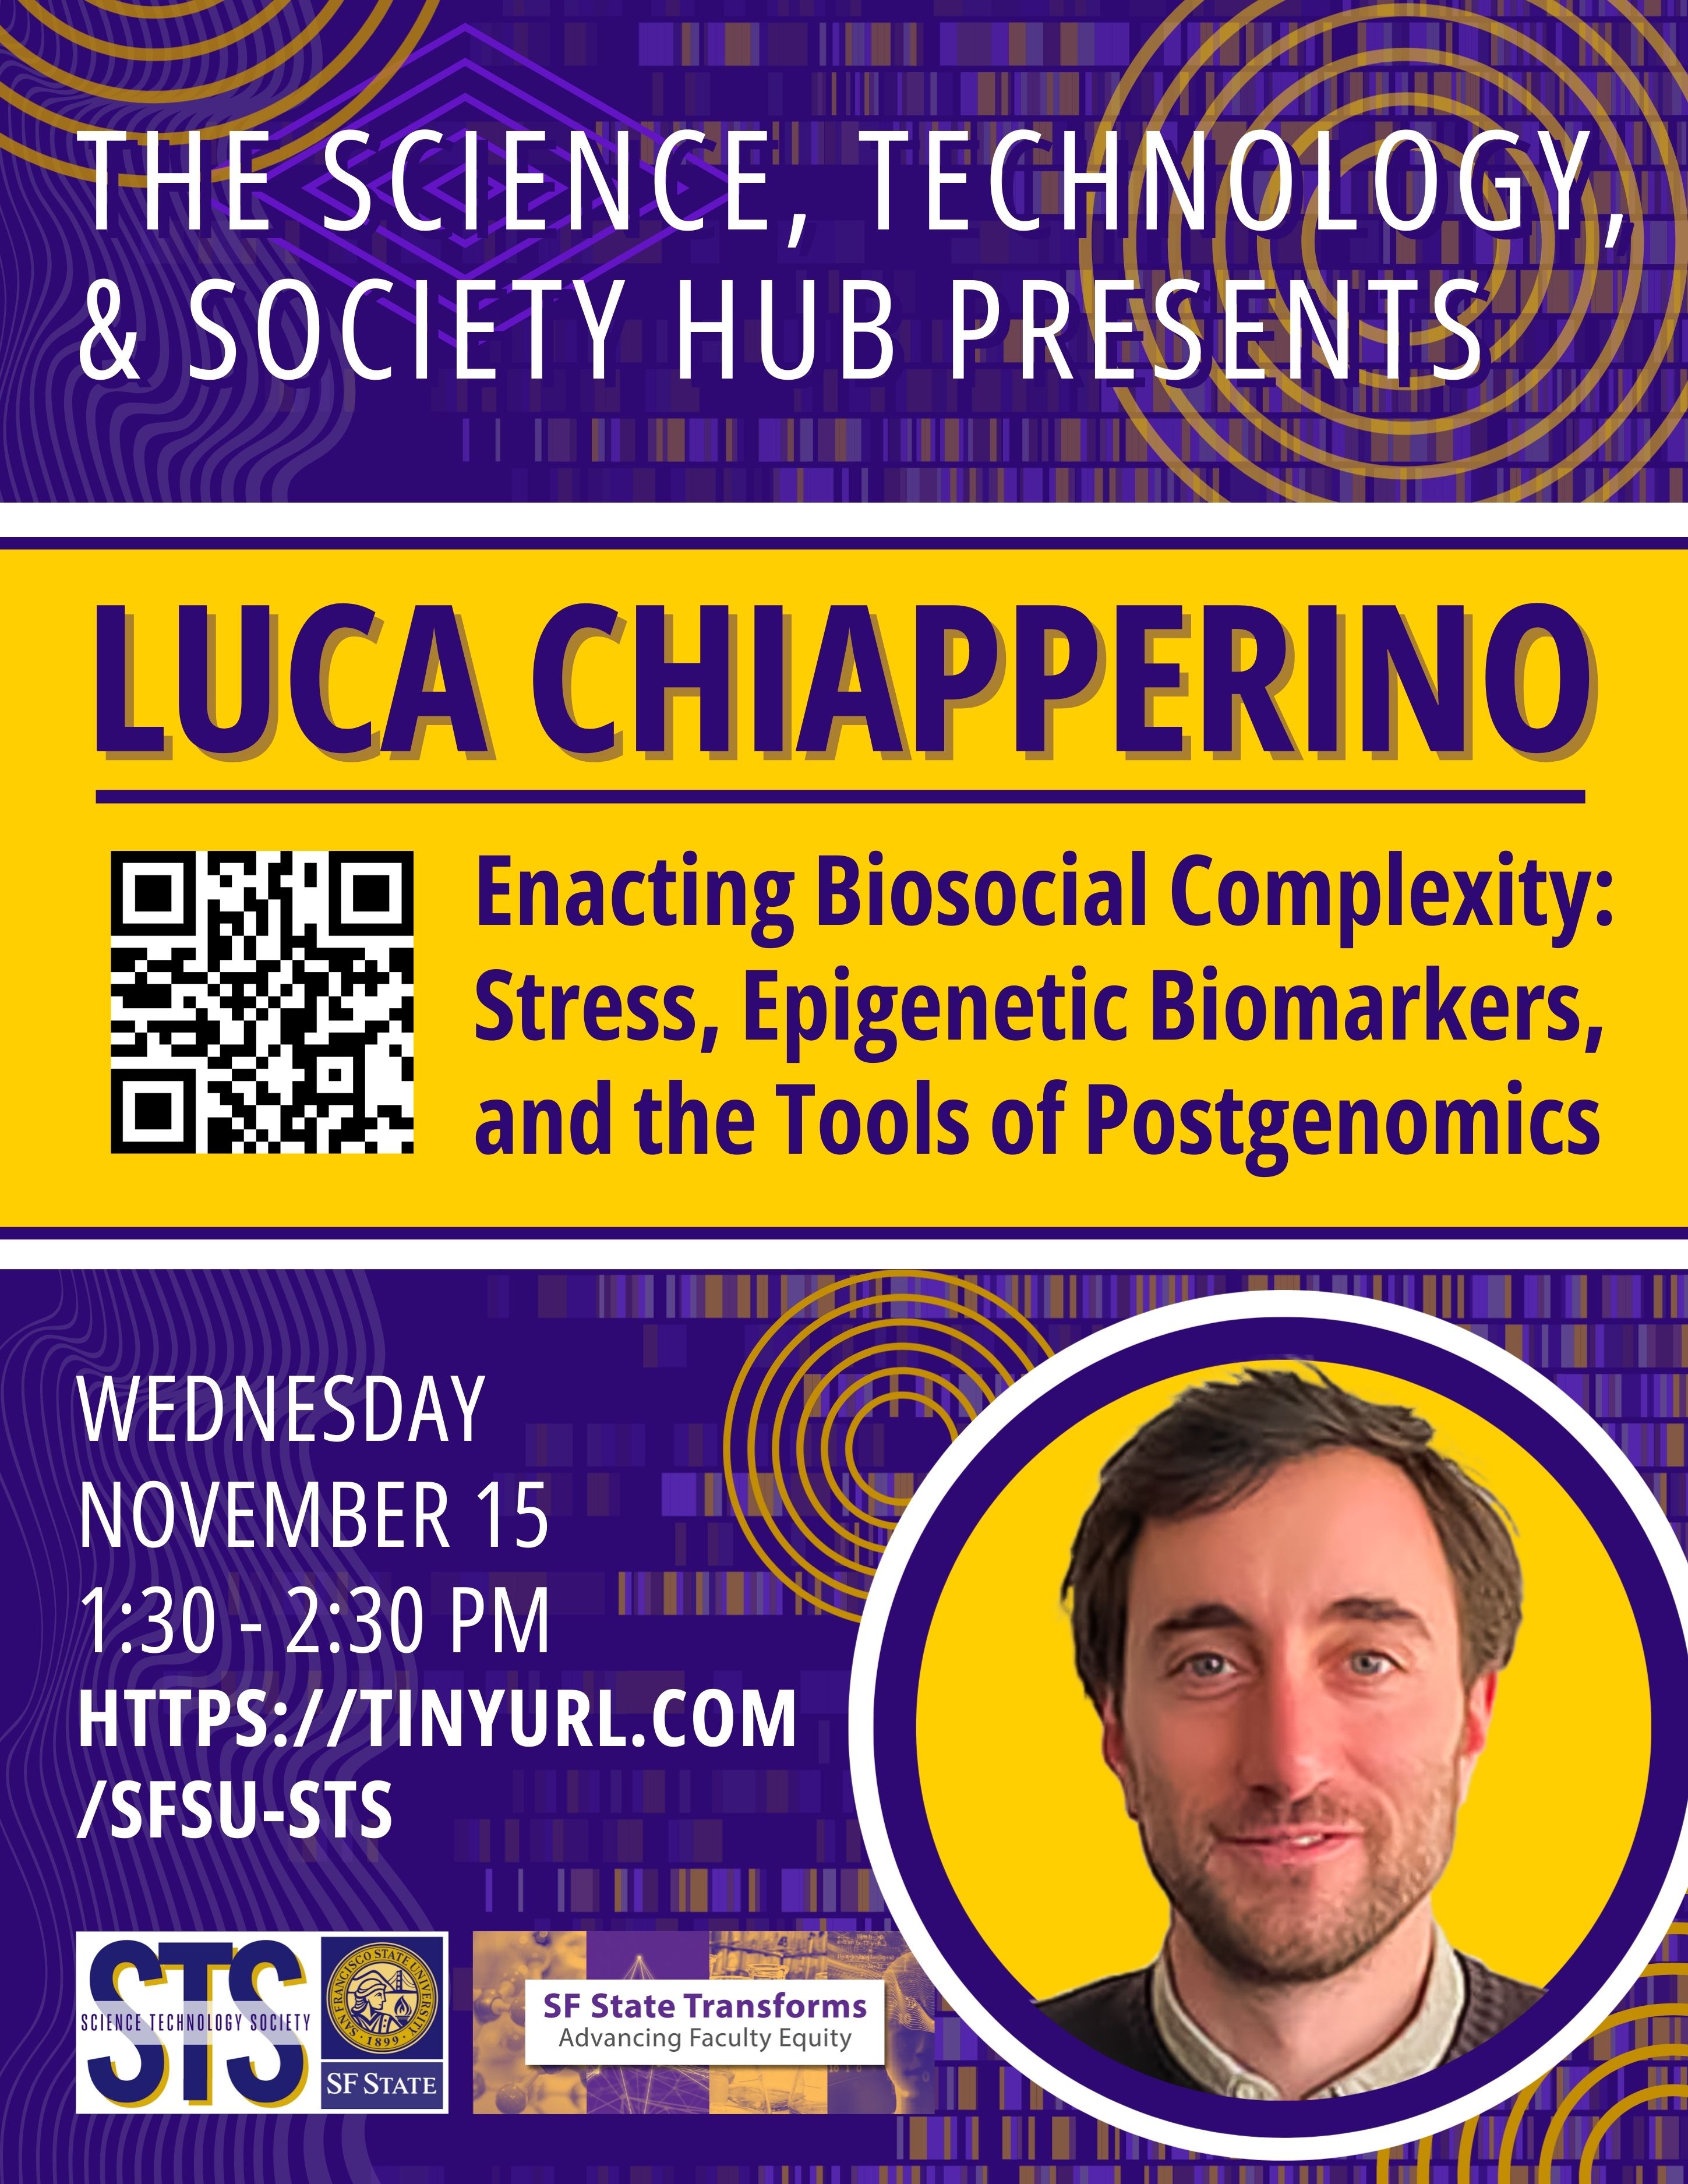 A purple and gold flyer advertising an event featuring Luca Chiapperino